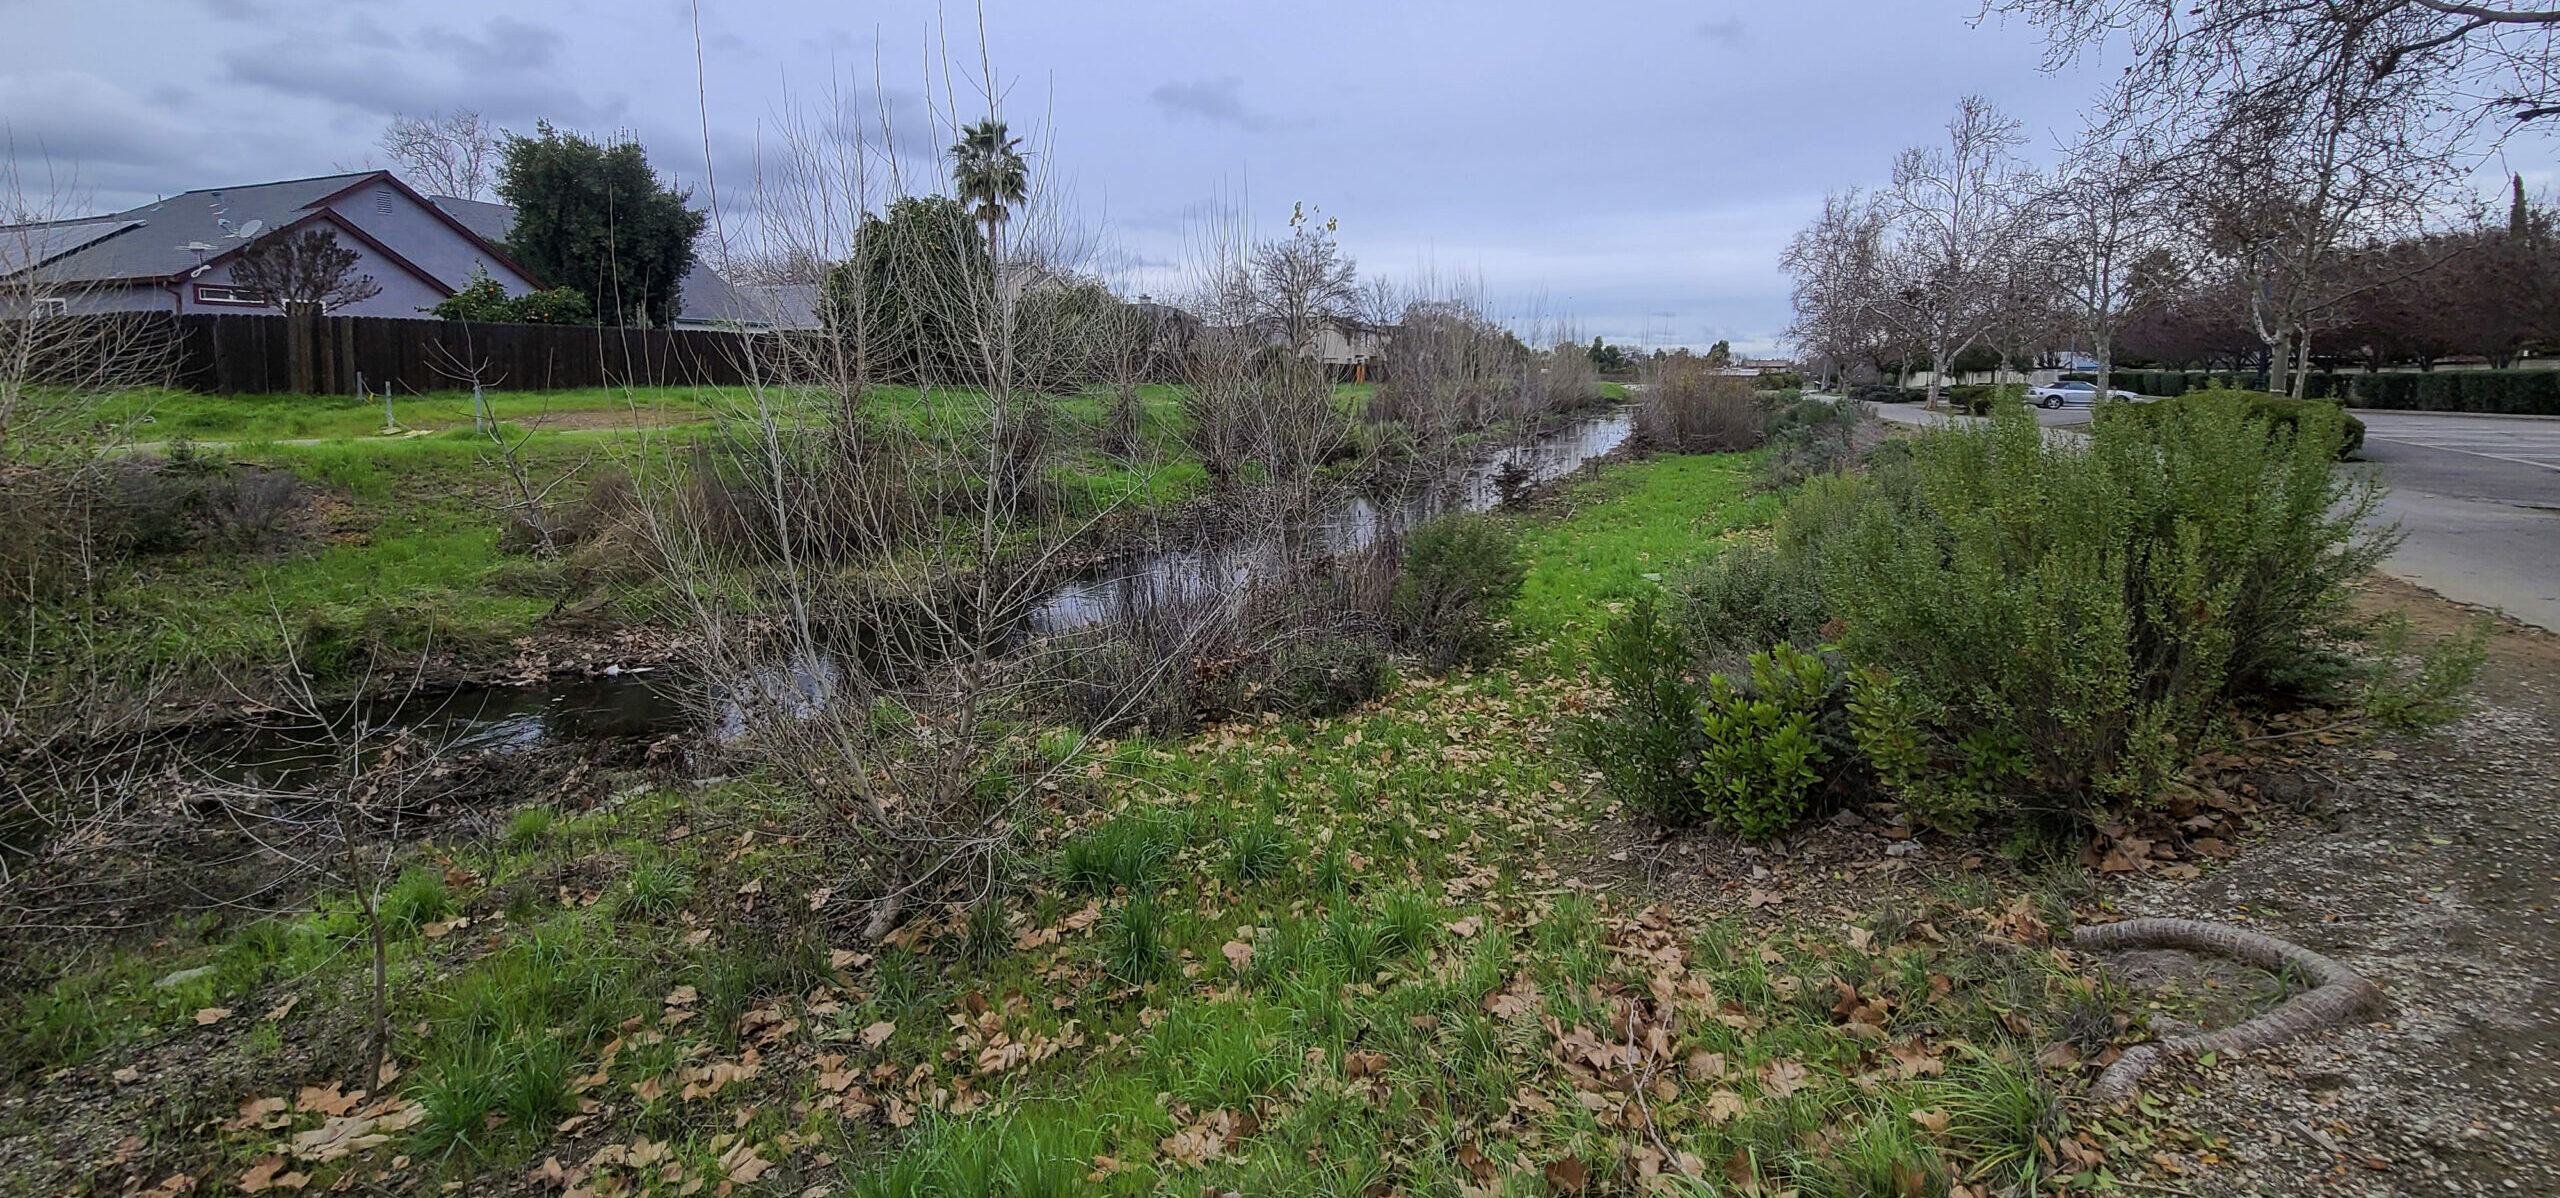 Overcast skies, a flowing creek and green vegetation.